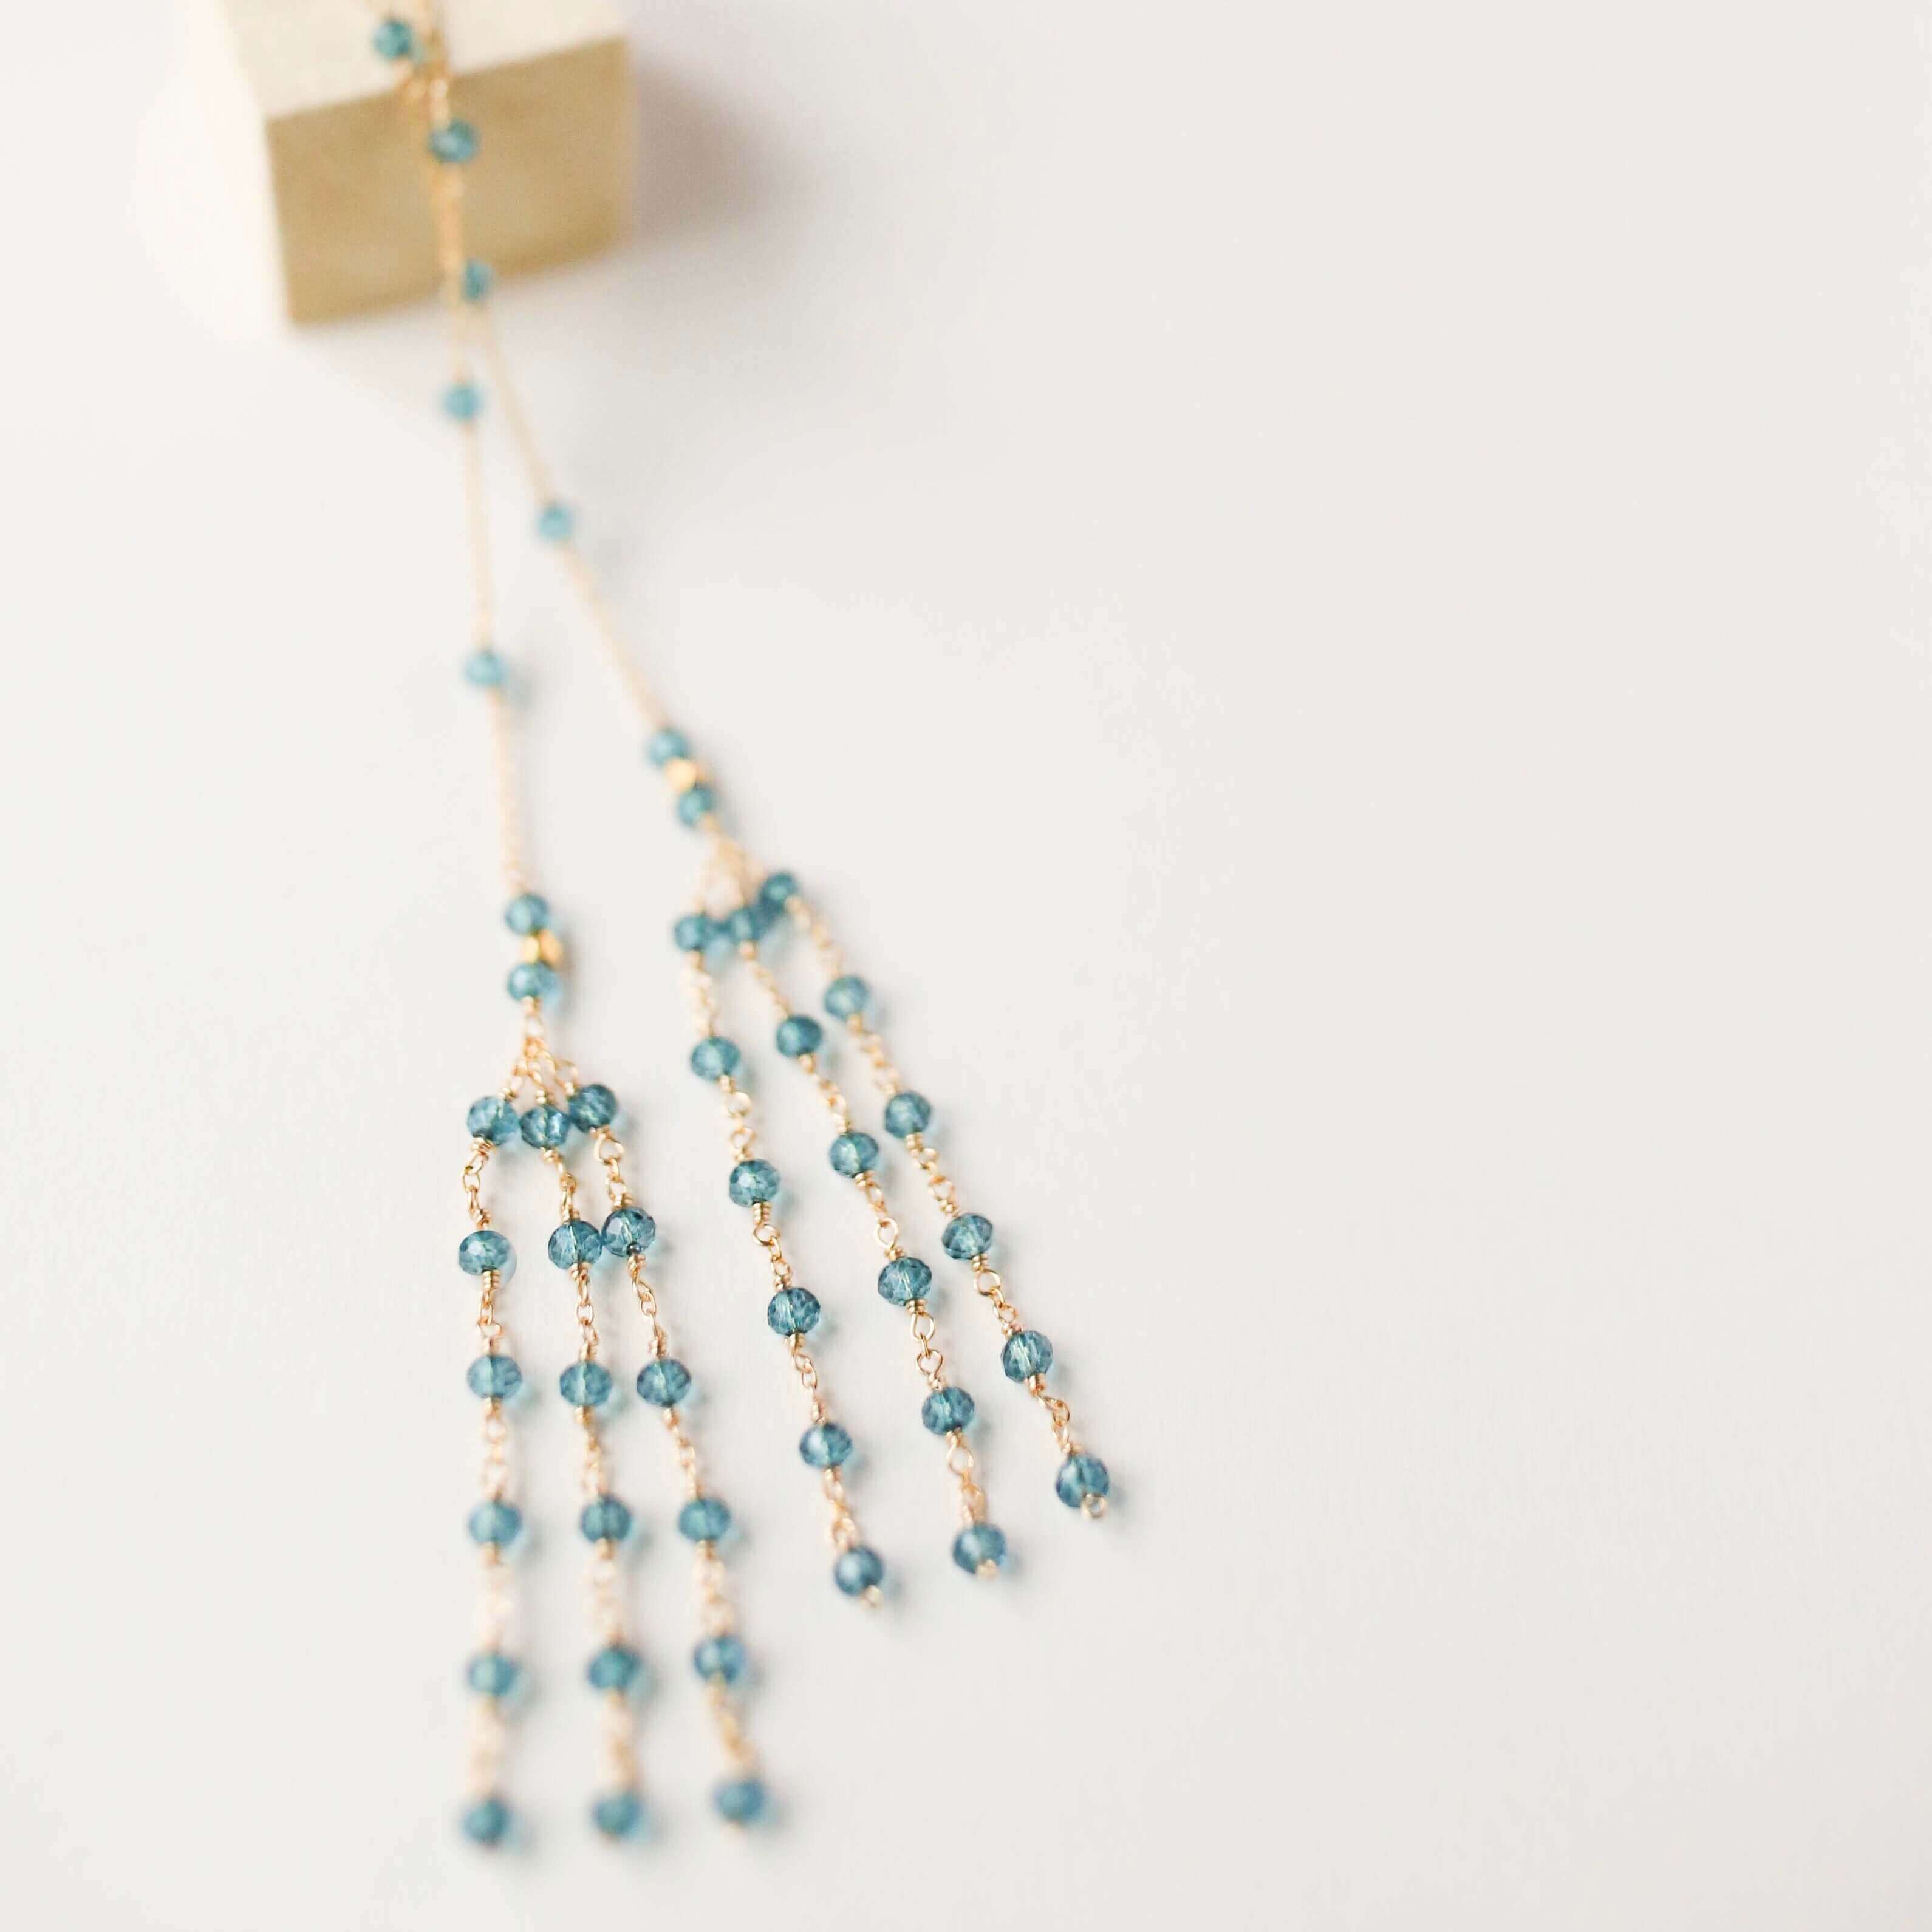 Gold-plated London Blue Quartz Lariat Necklace with a stunning tassel